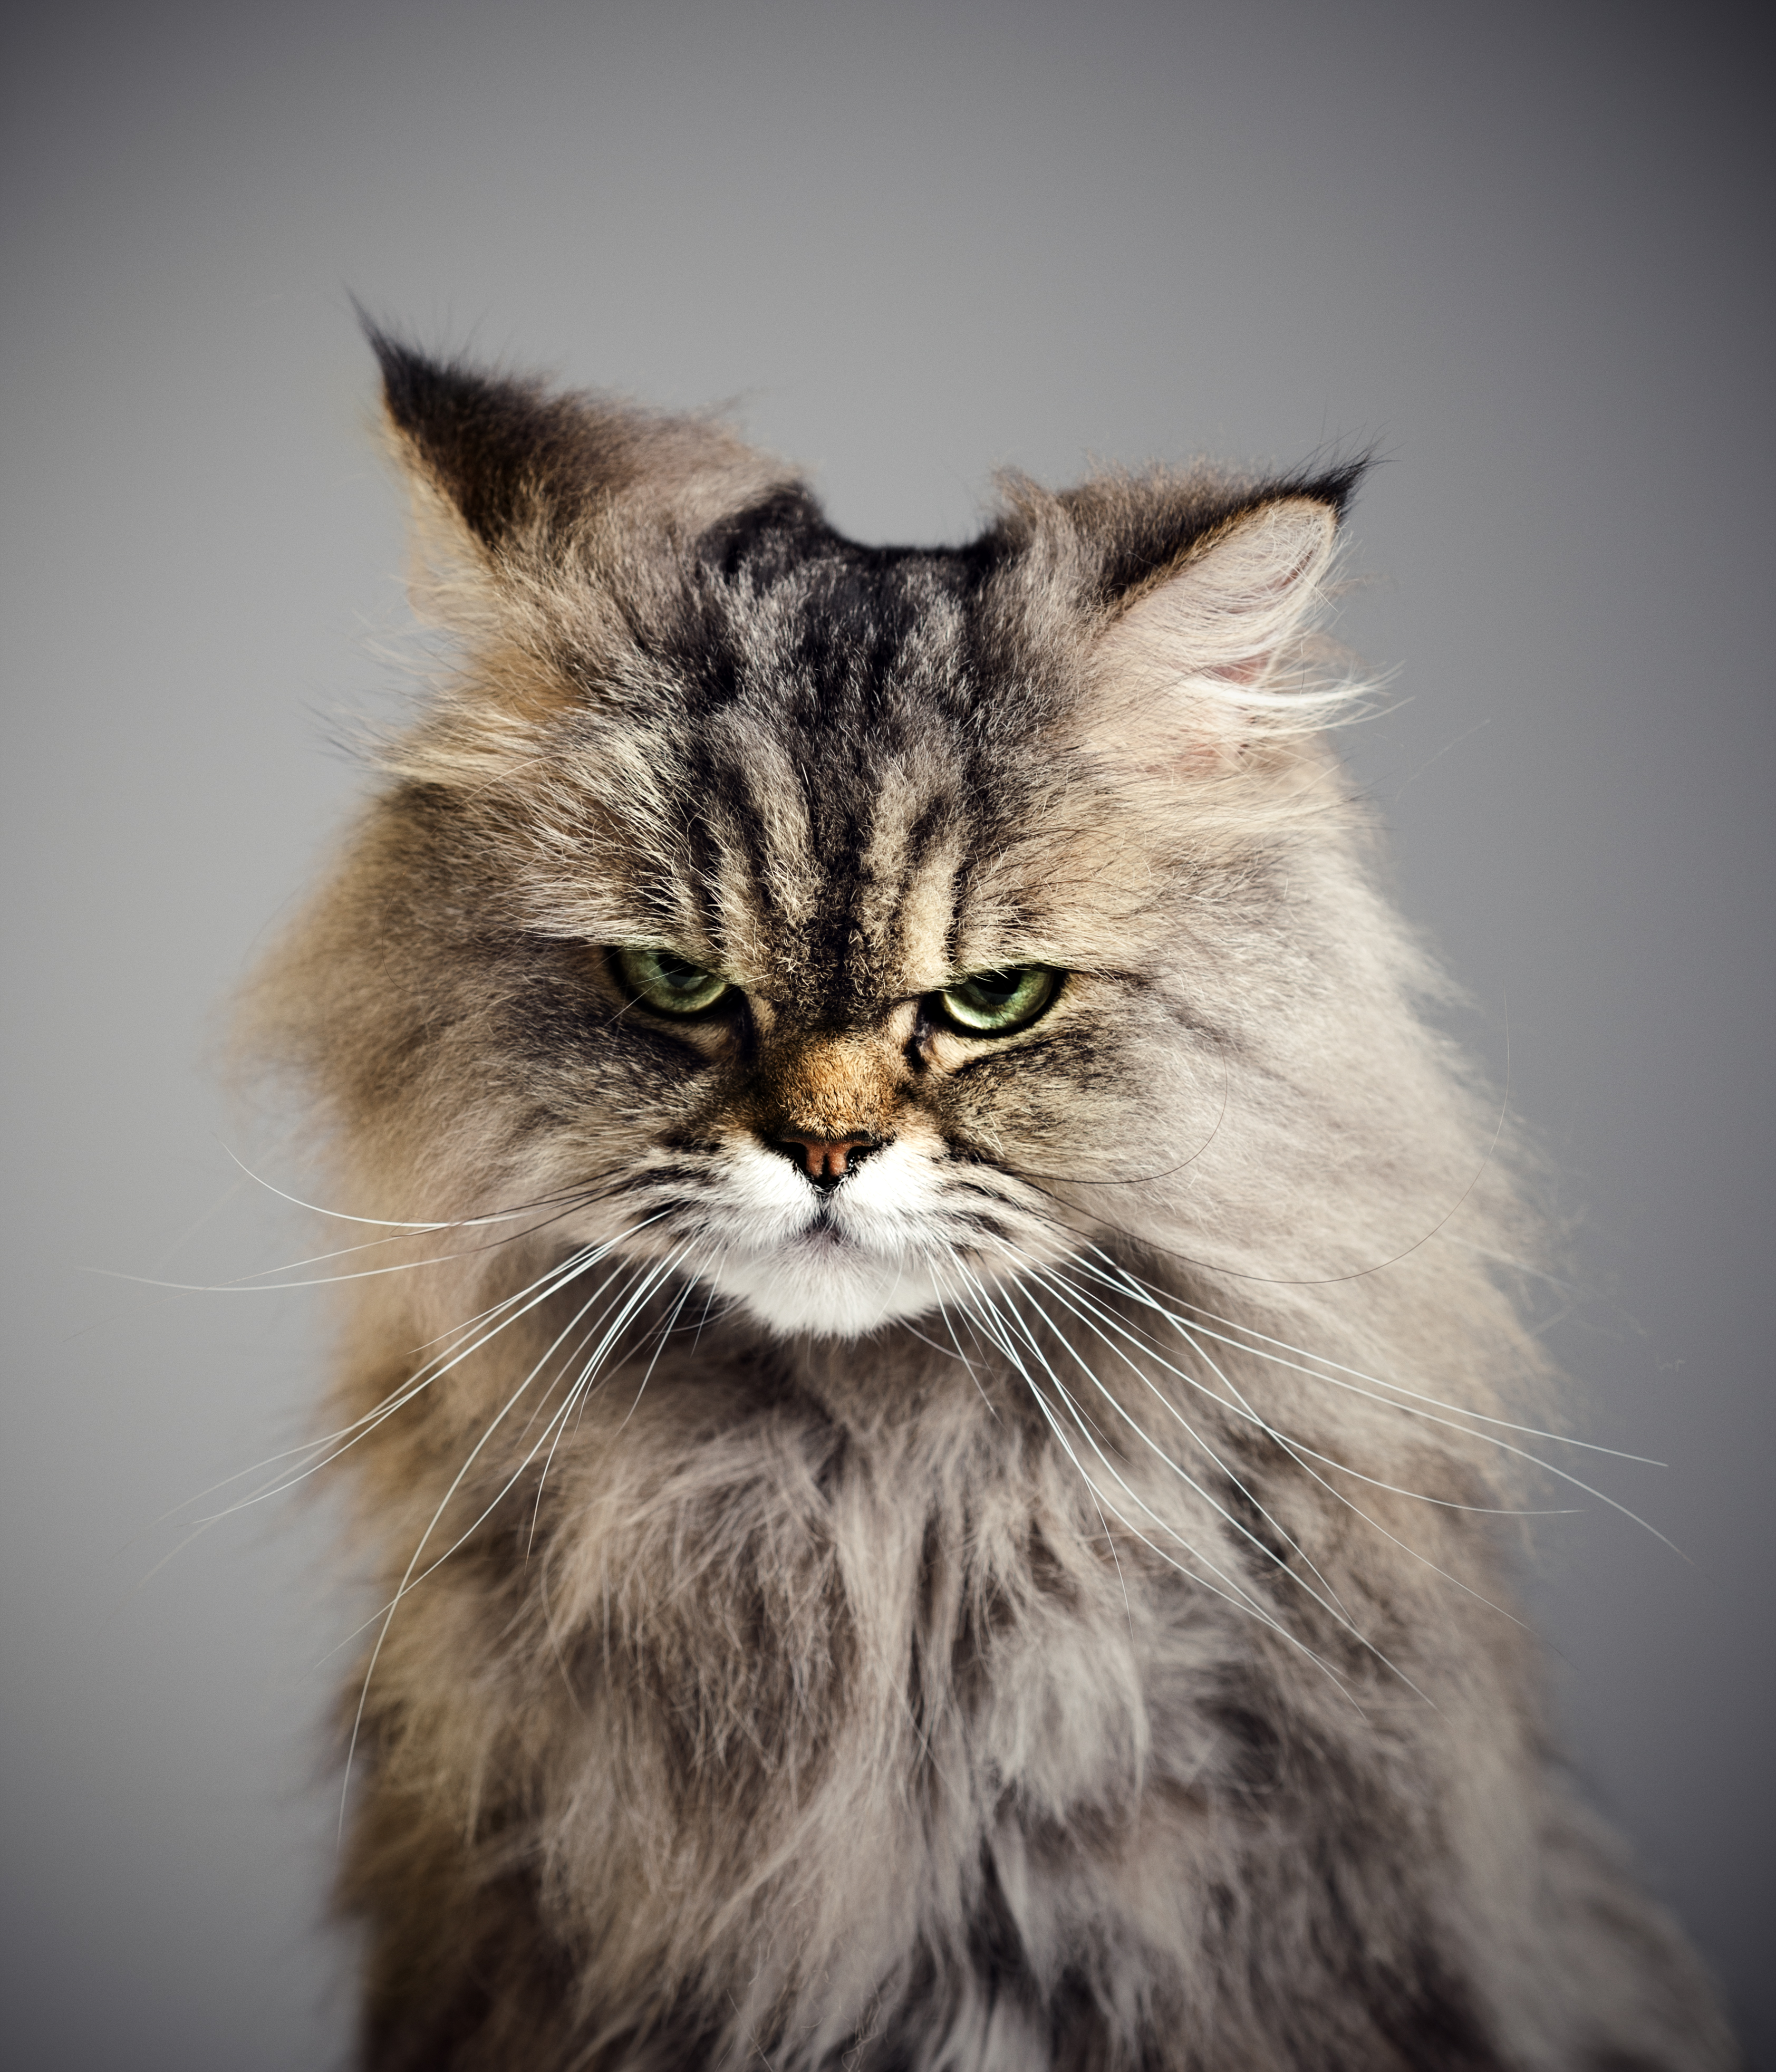 An angry-looking cat poses for the camera.